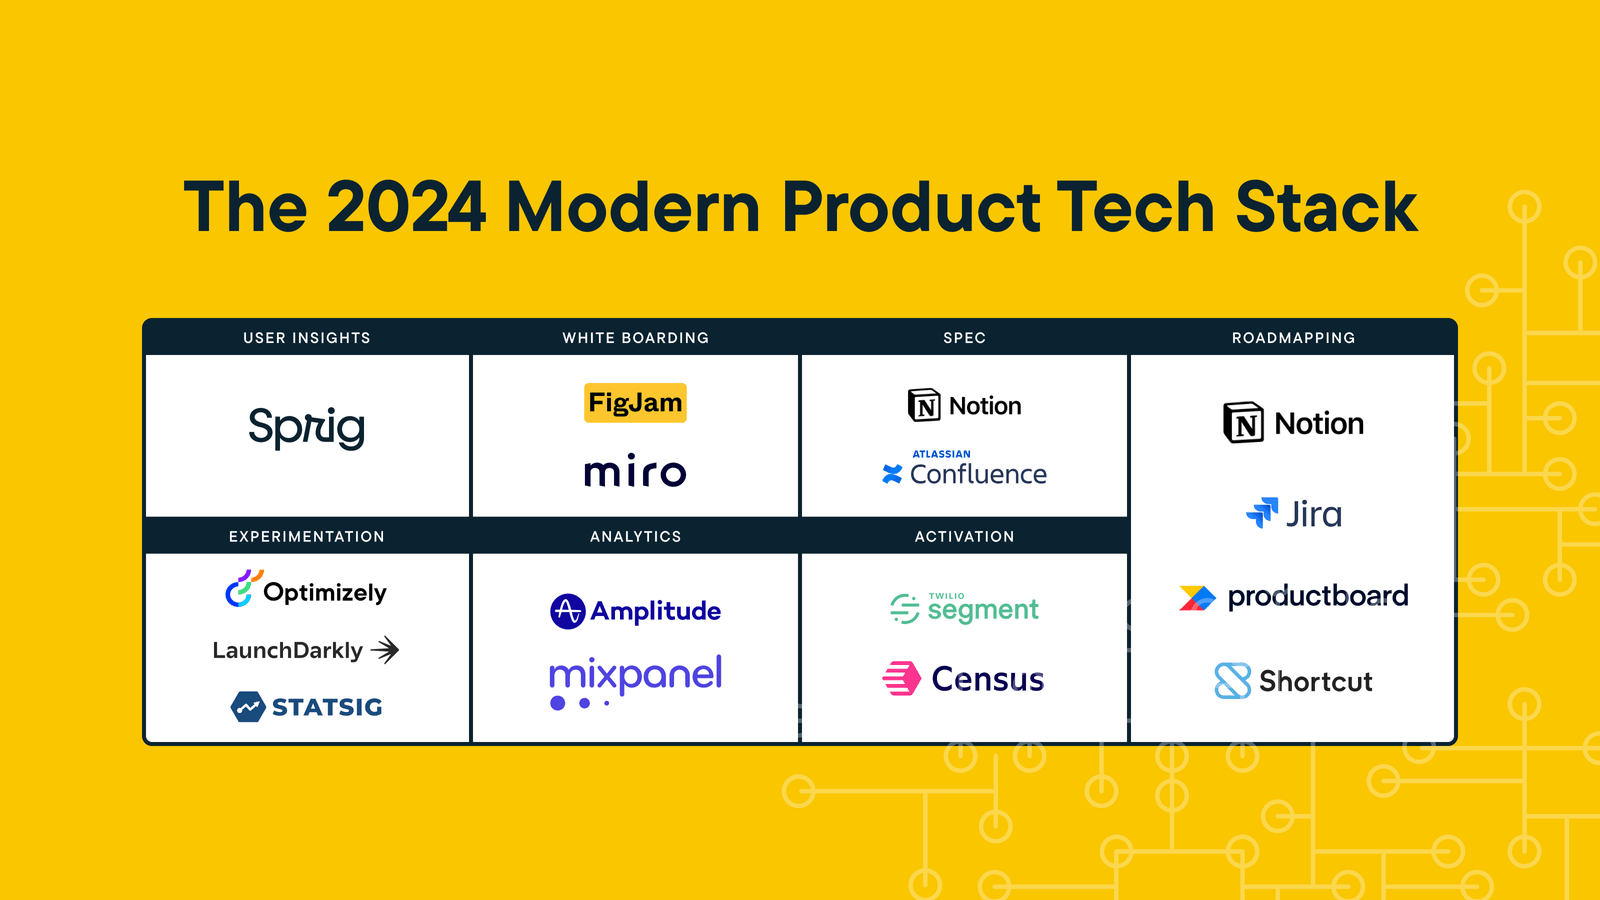 The 2024 Modern Product Tech Stack